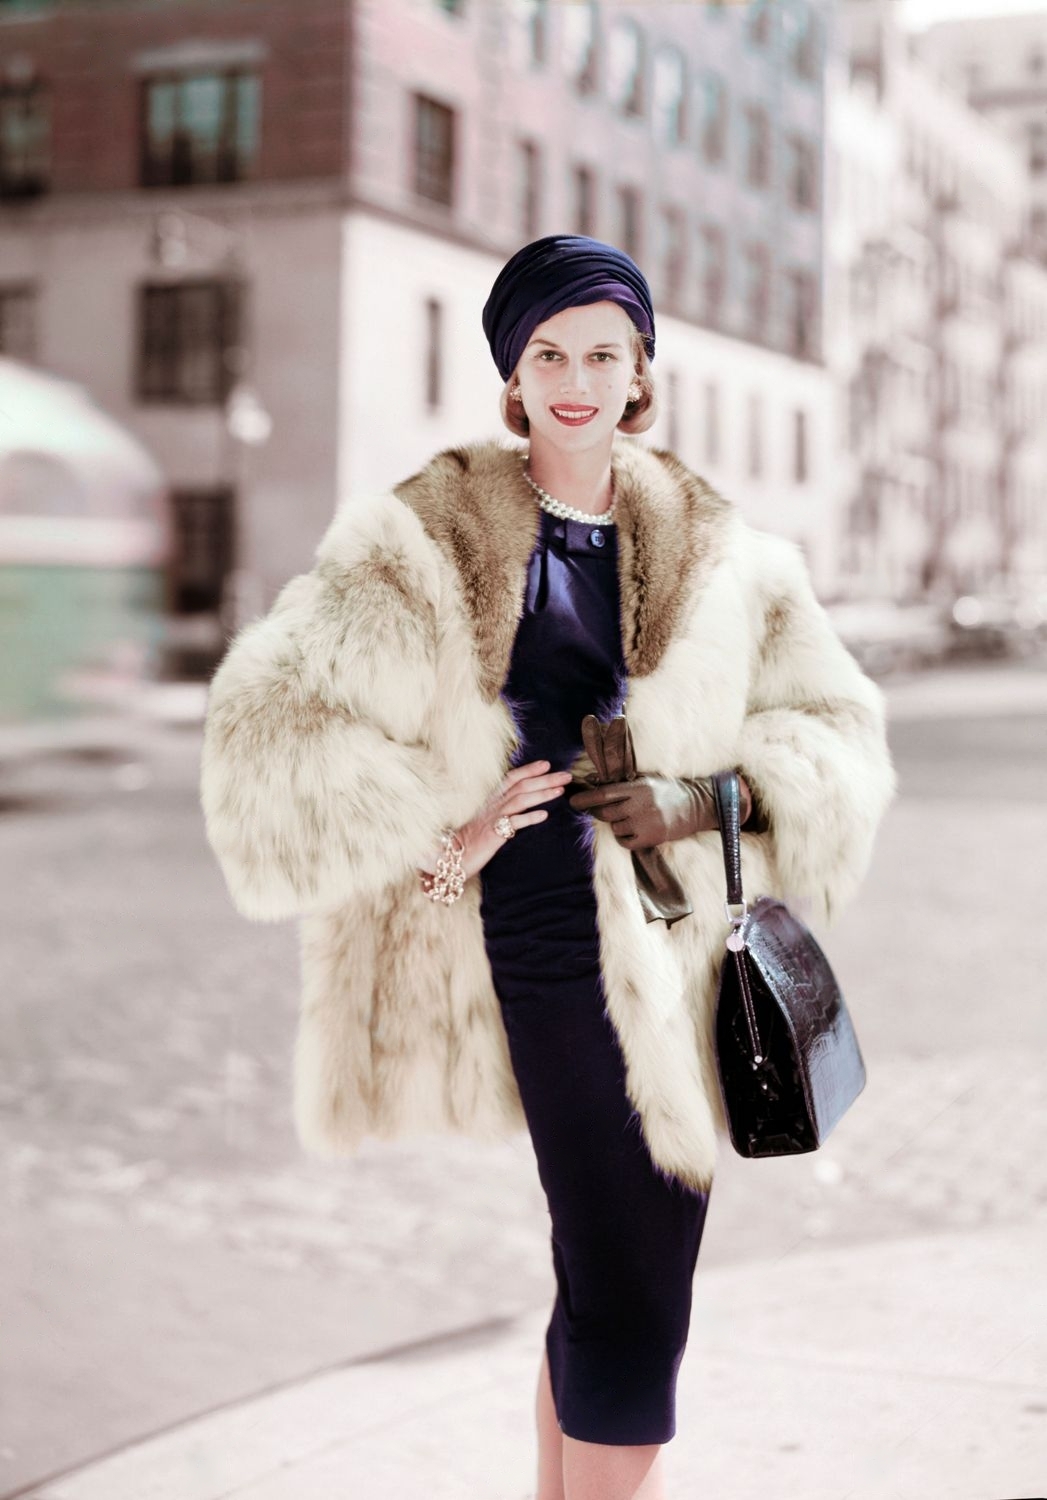 https://caveidice.files.wordpress.com/2023/08/patsy-pulitzer-is-wearing-fur-coat-of-russian-lynx-and-canadian-fisher-by-b.-wolman-dress-by-harmay-turban-by-emme-earrings-and-necklace-by-tiffanys-photo-by-frances-mclaughlin-gill-vog.jpeg